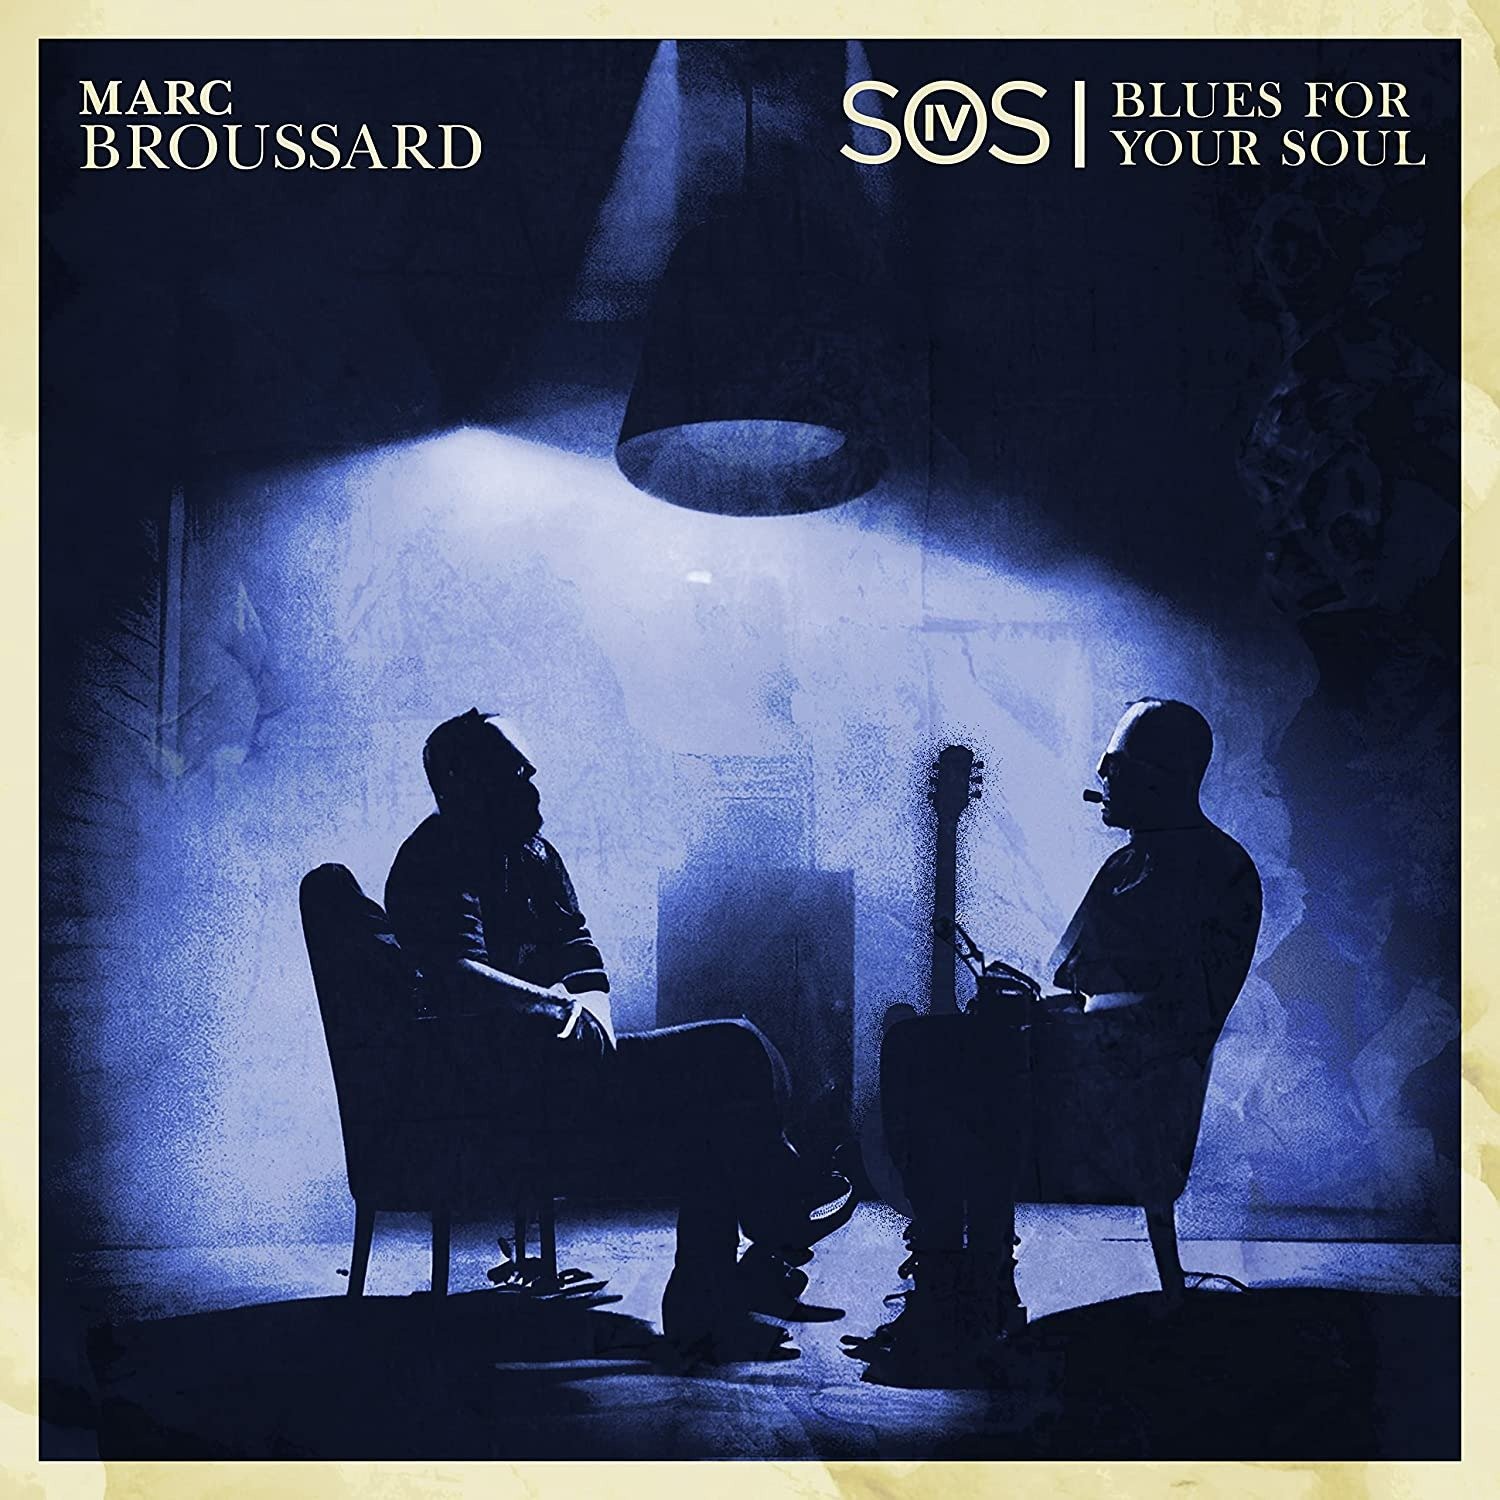 CD Shop - BROUSSARD, MARC S.O.S. 4: BLUES FOR YOUR SOUL